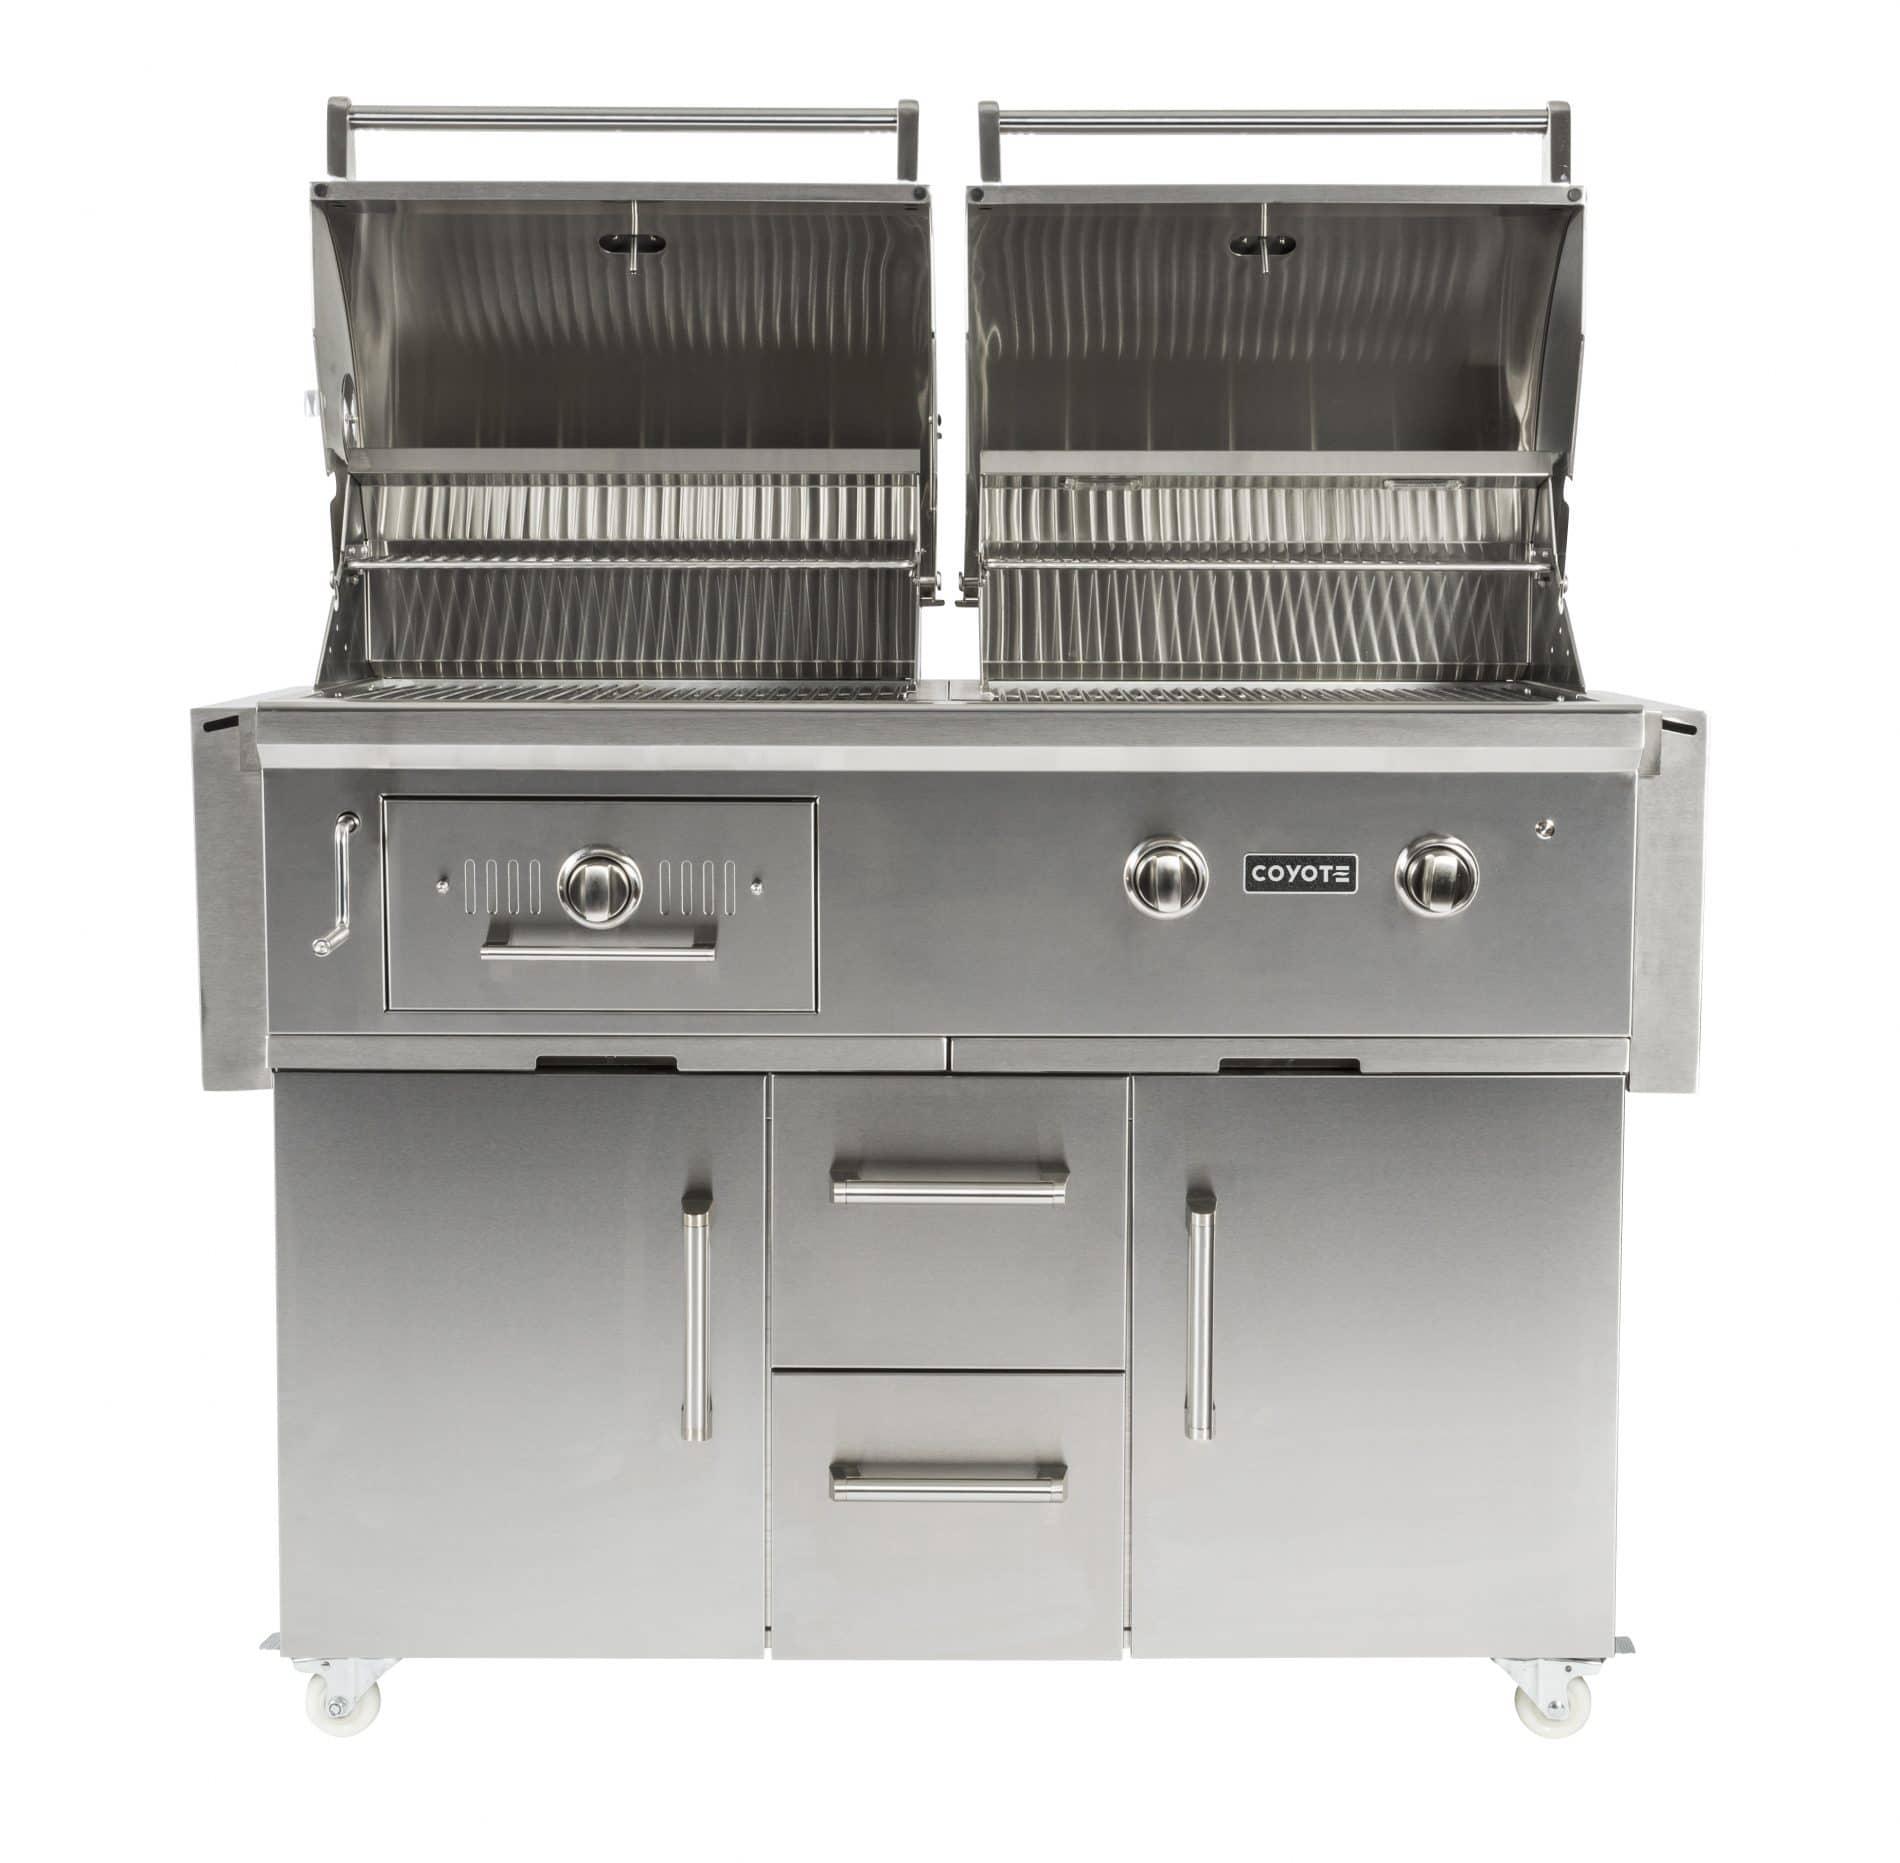 Coyote 50 Inch Hybrid Built-In Grill - C1HY50 LP/NG